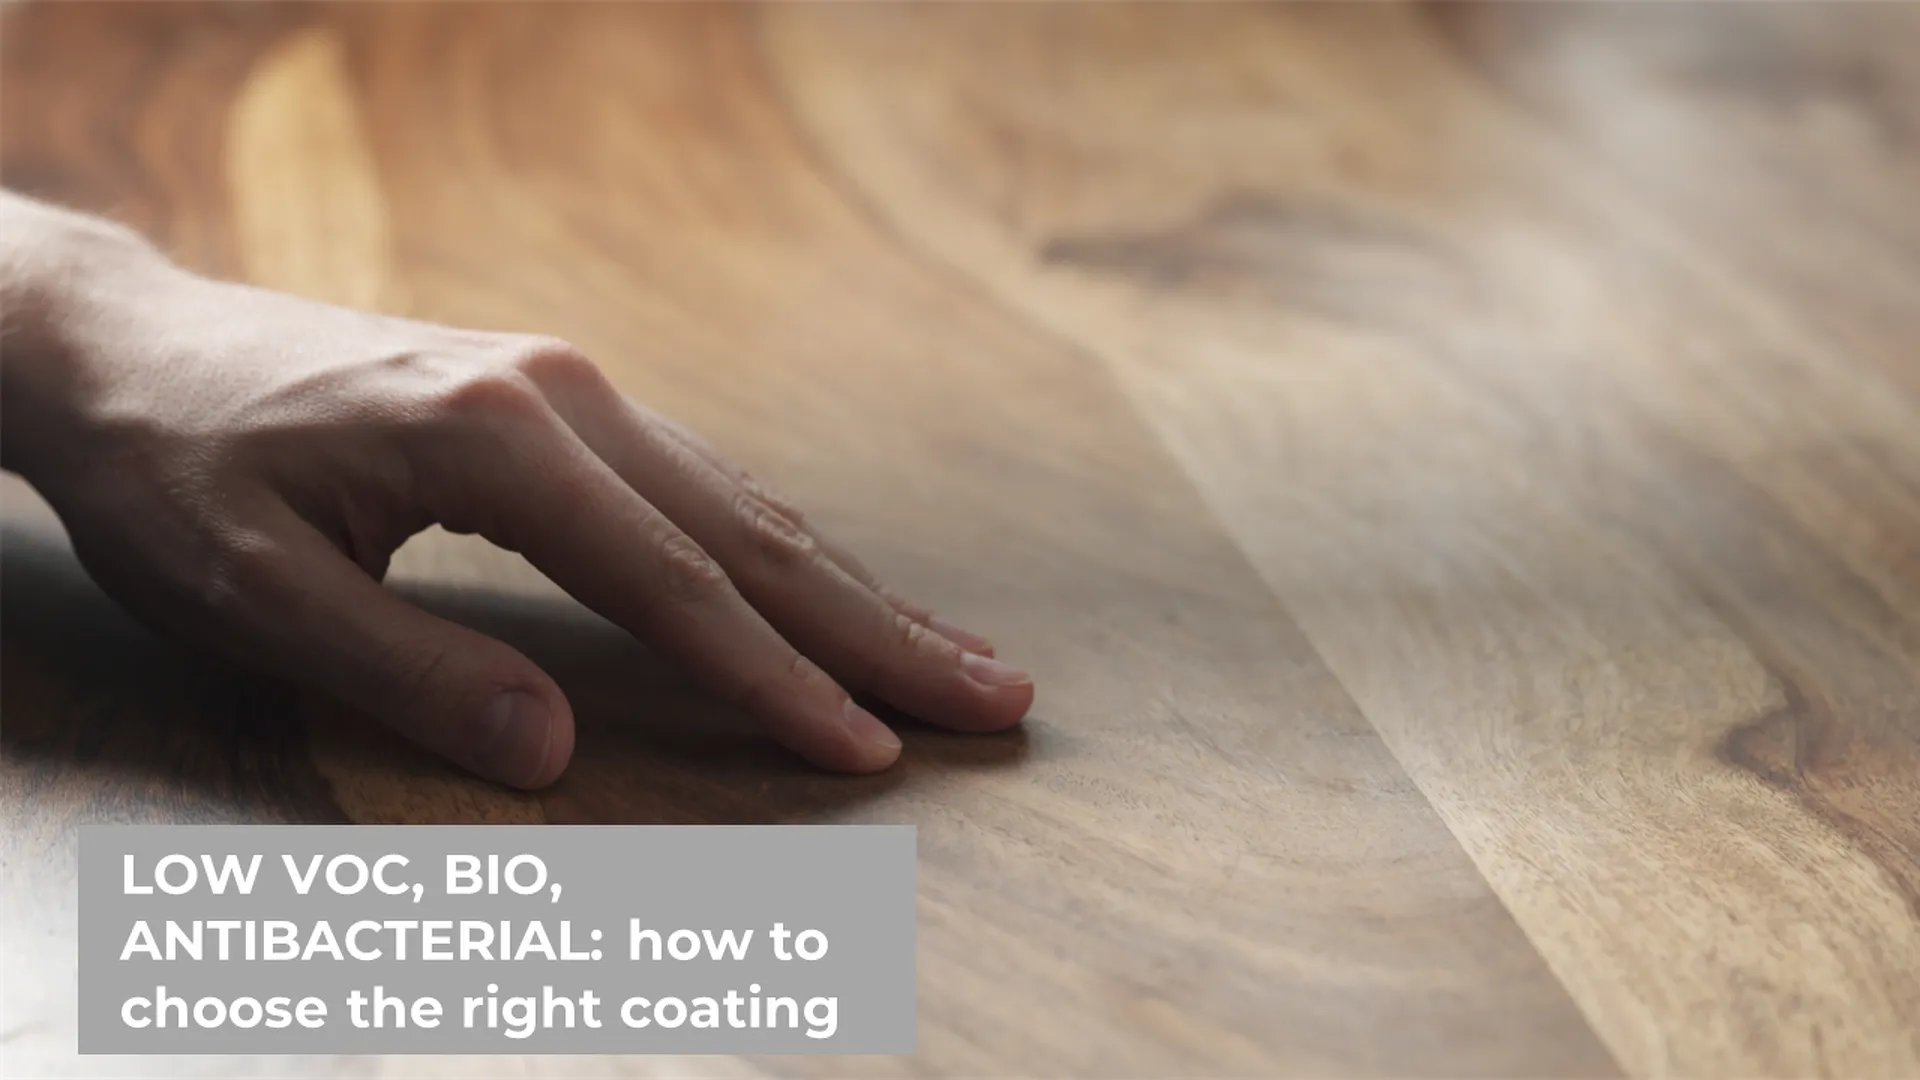 LOW VOC, BIO, ANTIBACTERIAL: how to choose the right Coating